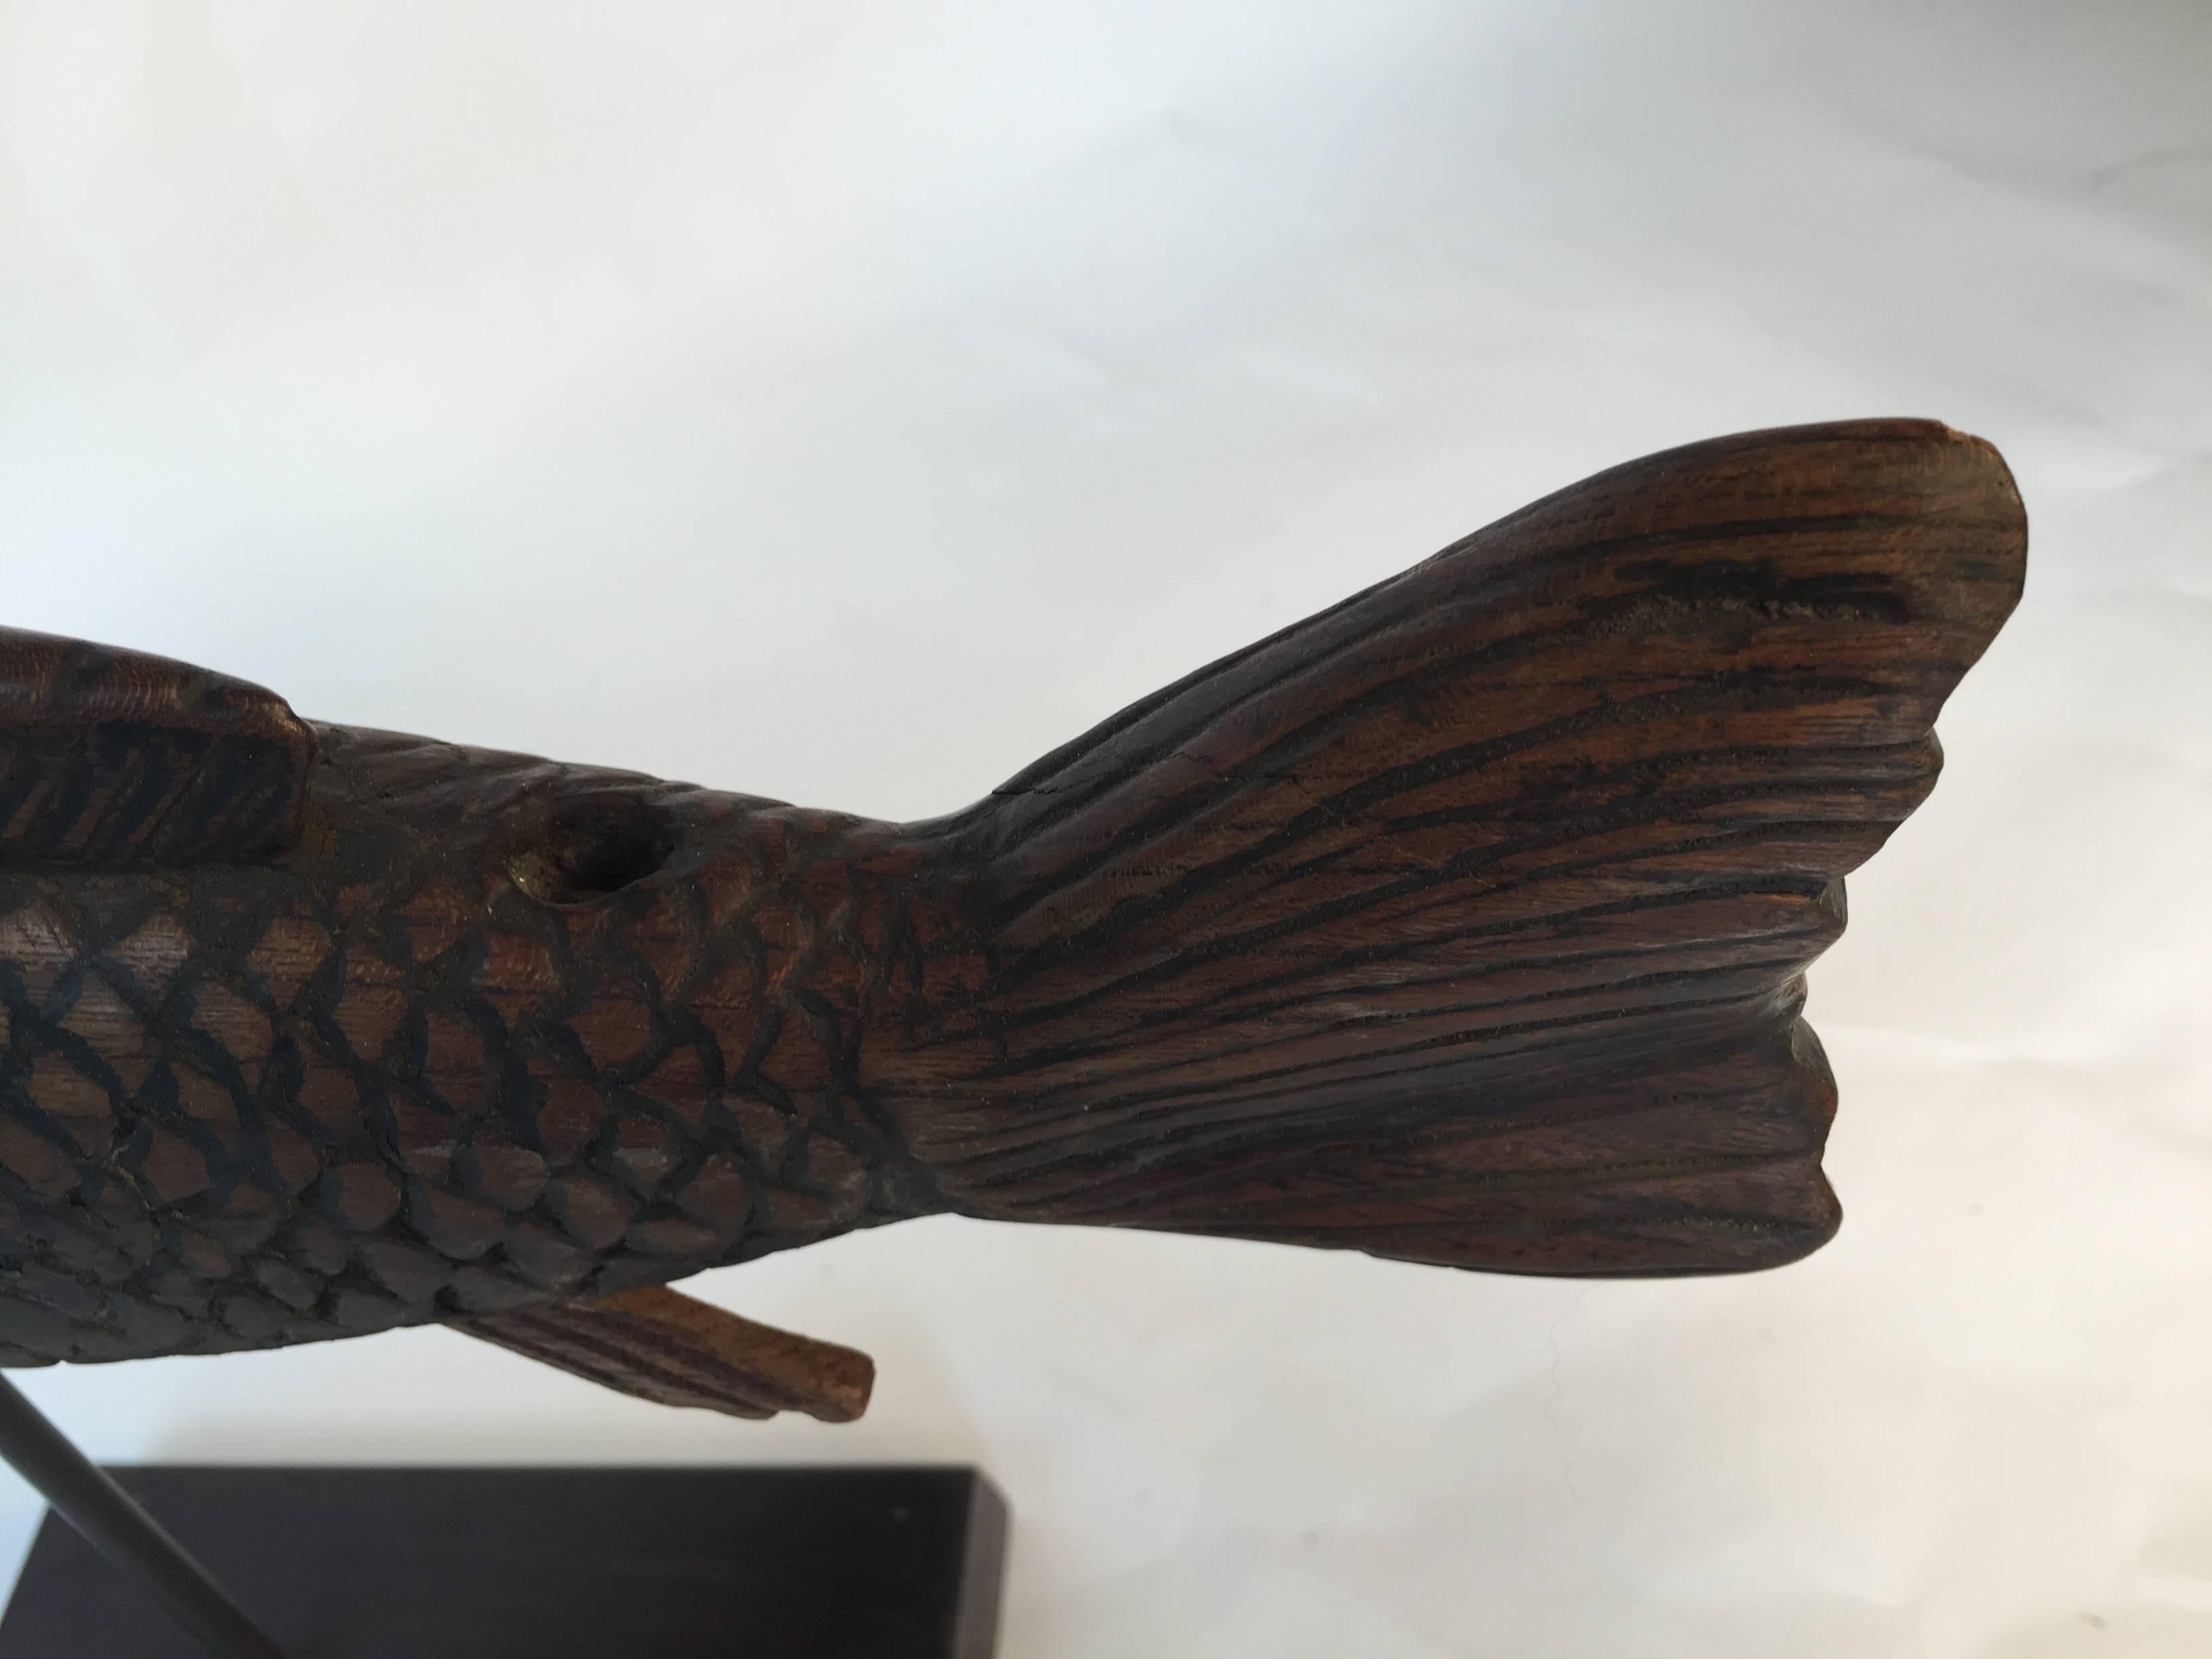 Japanese Hand-Carved Wood KOI Good Fortune Fish Sculpture, 19thc FREE SHIP 2